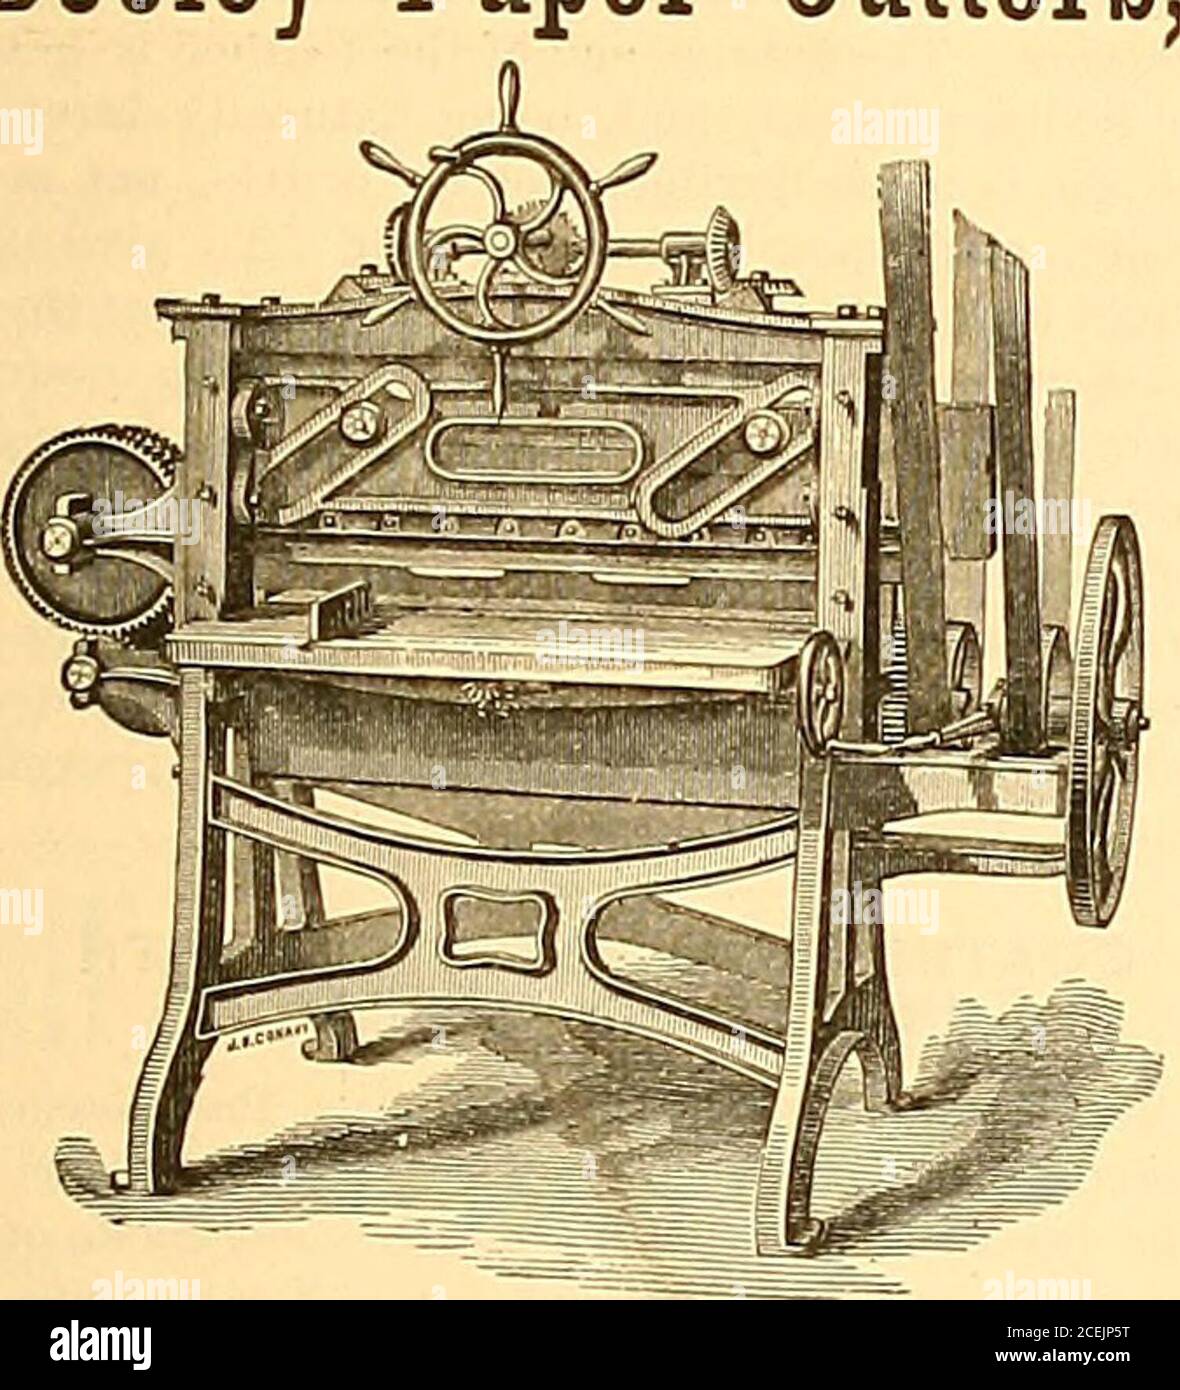 . The American stationer. THE RAISBECK ELECTROTYPE CO., Electrotypers & Stereotypers, No. 68 Beekman Street, New Tork.ELECTROTYPES MOUNTED ON WOOD OR METAU June 23, 1881.] THE AMERIOAI^ STATIONER 833 James G. Shaw, Pres. P. B. Wyckoff, Treas. » jTg. SHAW BlankBookCo., Blank BookManufacturers, 83 and 85 Duane Street, NEW YORK. -THE- Dfloley Paper Cutters. Manufactured by THE ATLANTIC WORKS, EAST BOSTON, MASS. Send for Circular. Correspondence Solicited. WATER CLOSET PAPERS -A SPECIALTY.- iP case. $16.no n.on 9.006.E0 IS. SO9.0010.0011.00 Witch Hazeline (largest size, full count,medicated with E Stock Photo